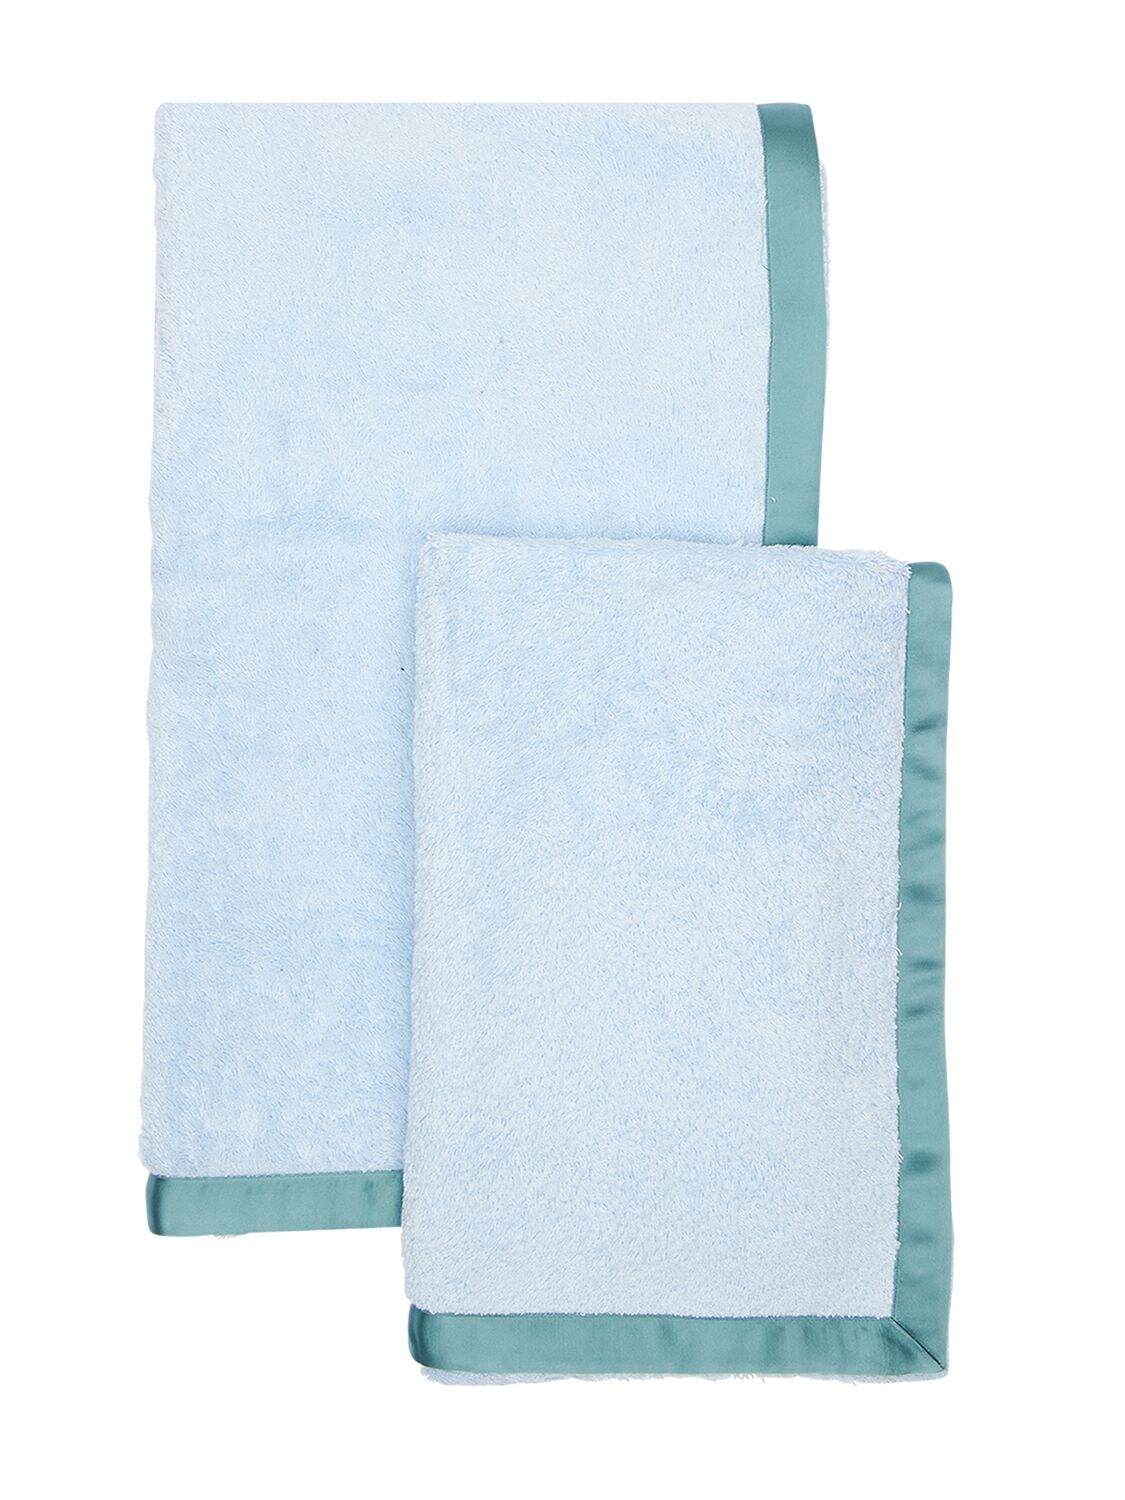 Alessandro Di Marco Set Of 2 Cotton Terrycloth Towels In Light Blue,salvia